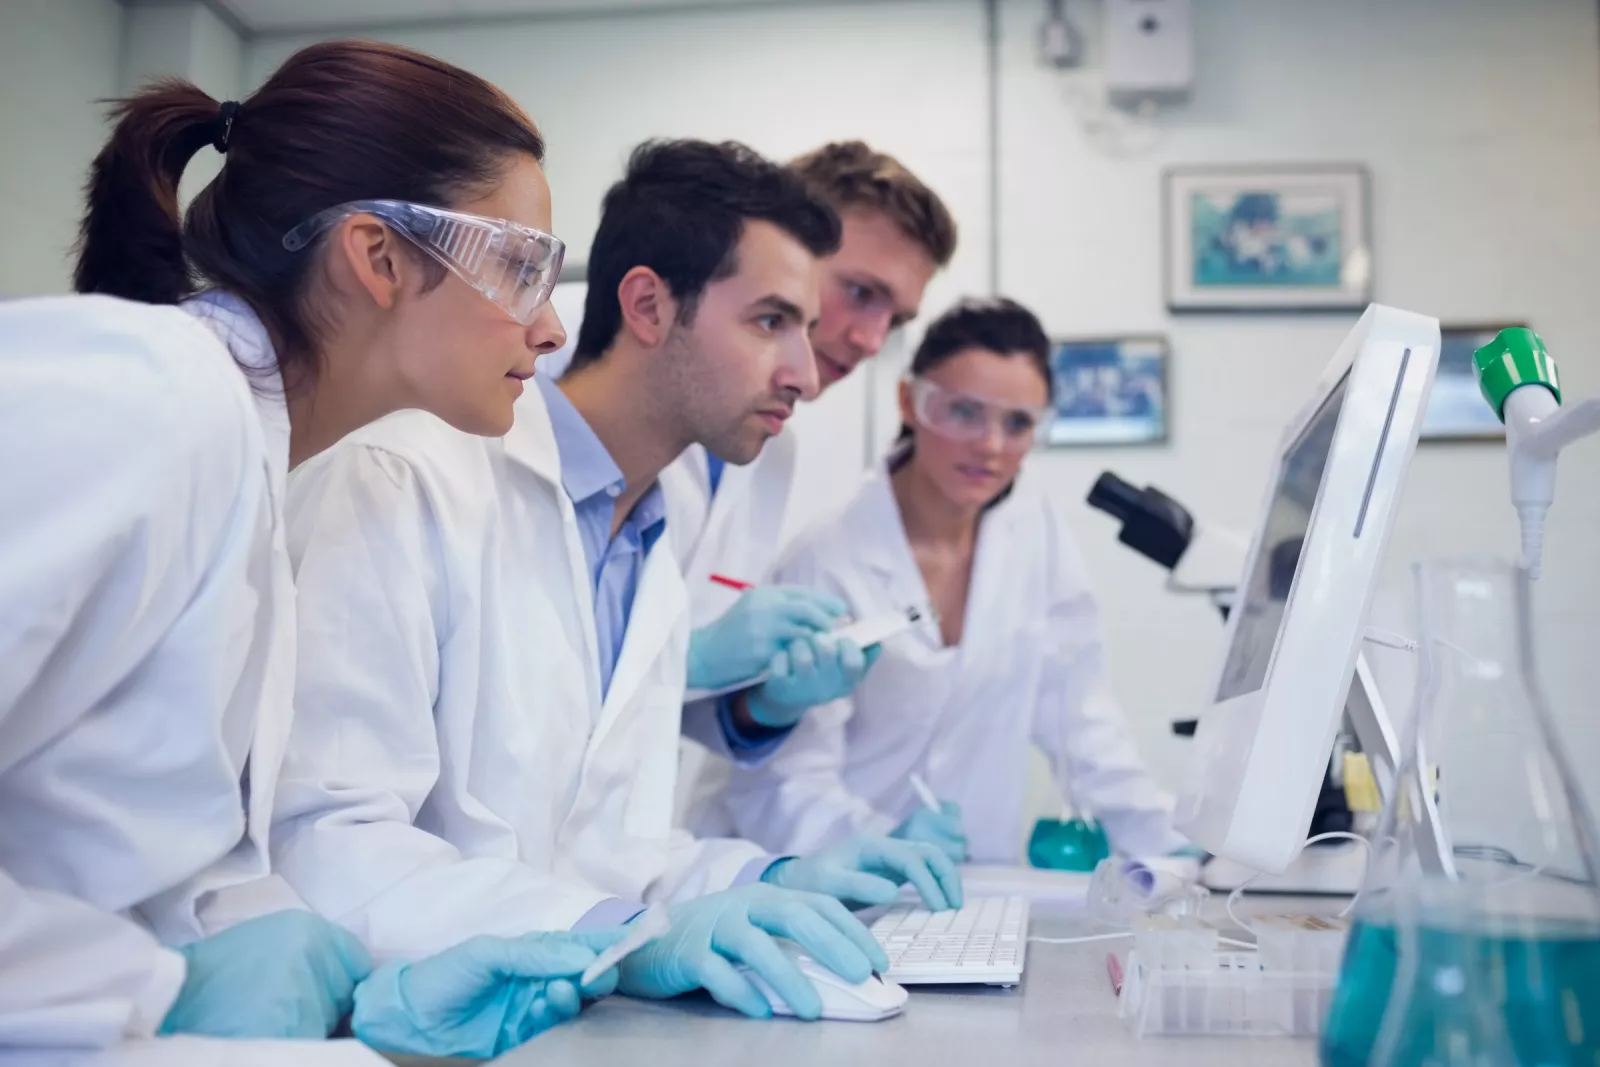 Research opportunities in Emilia Romagna - image of scientists in a lab